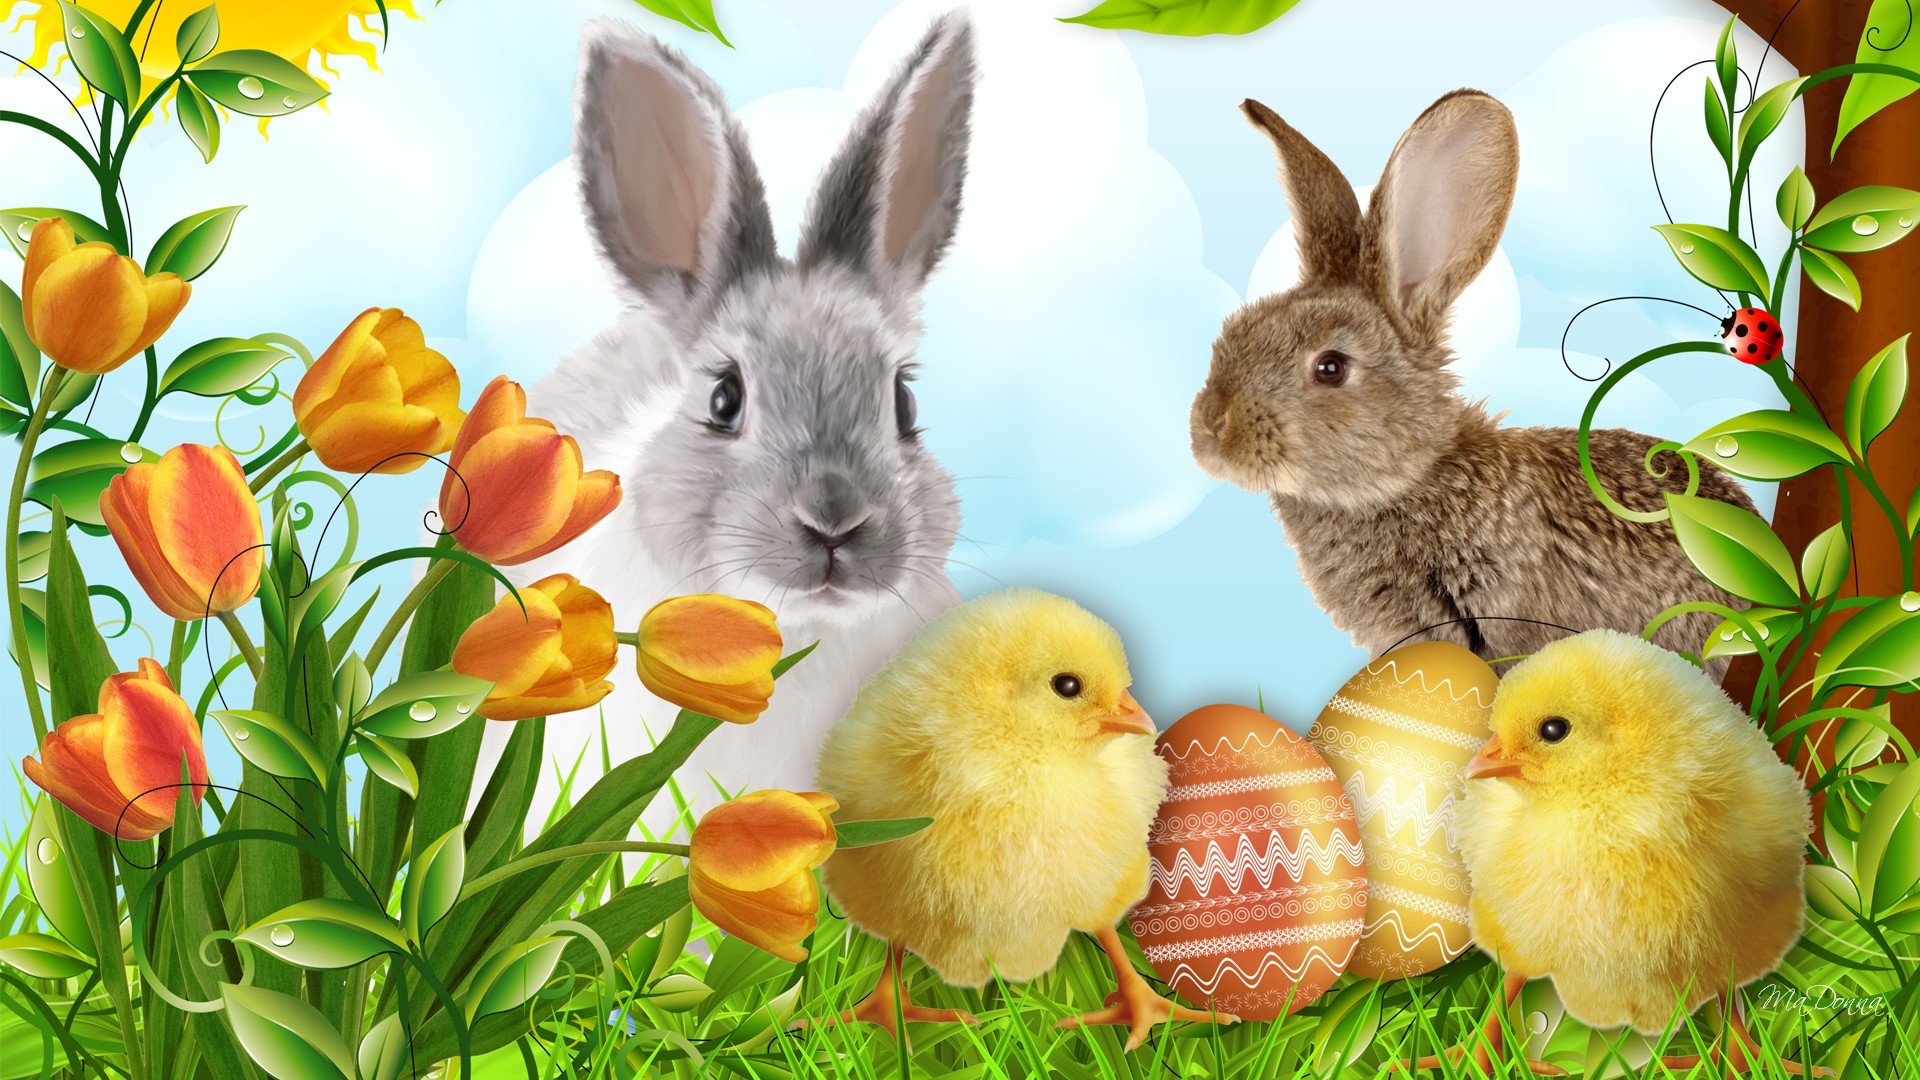 Happy Easter desktop hd wallpapers, hd images. Happy Easter cute bunny.